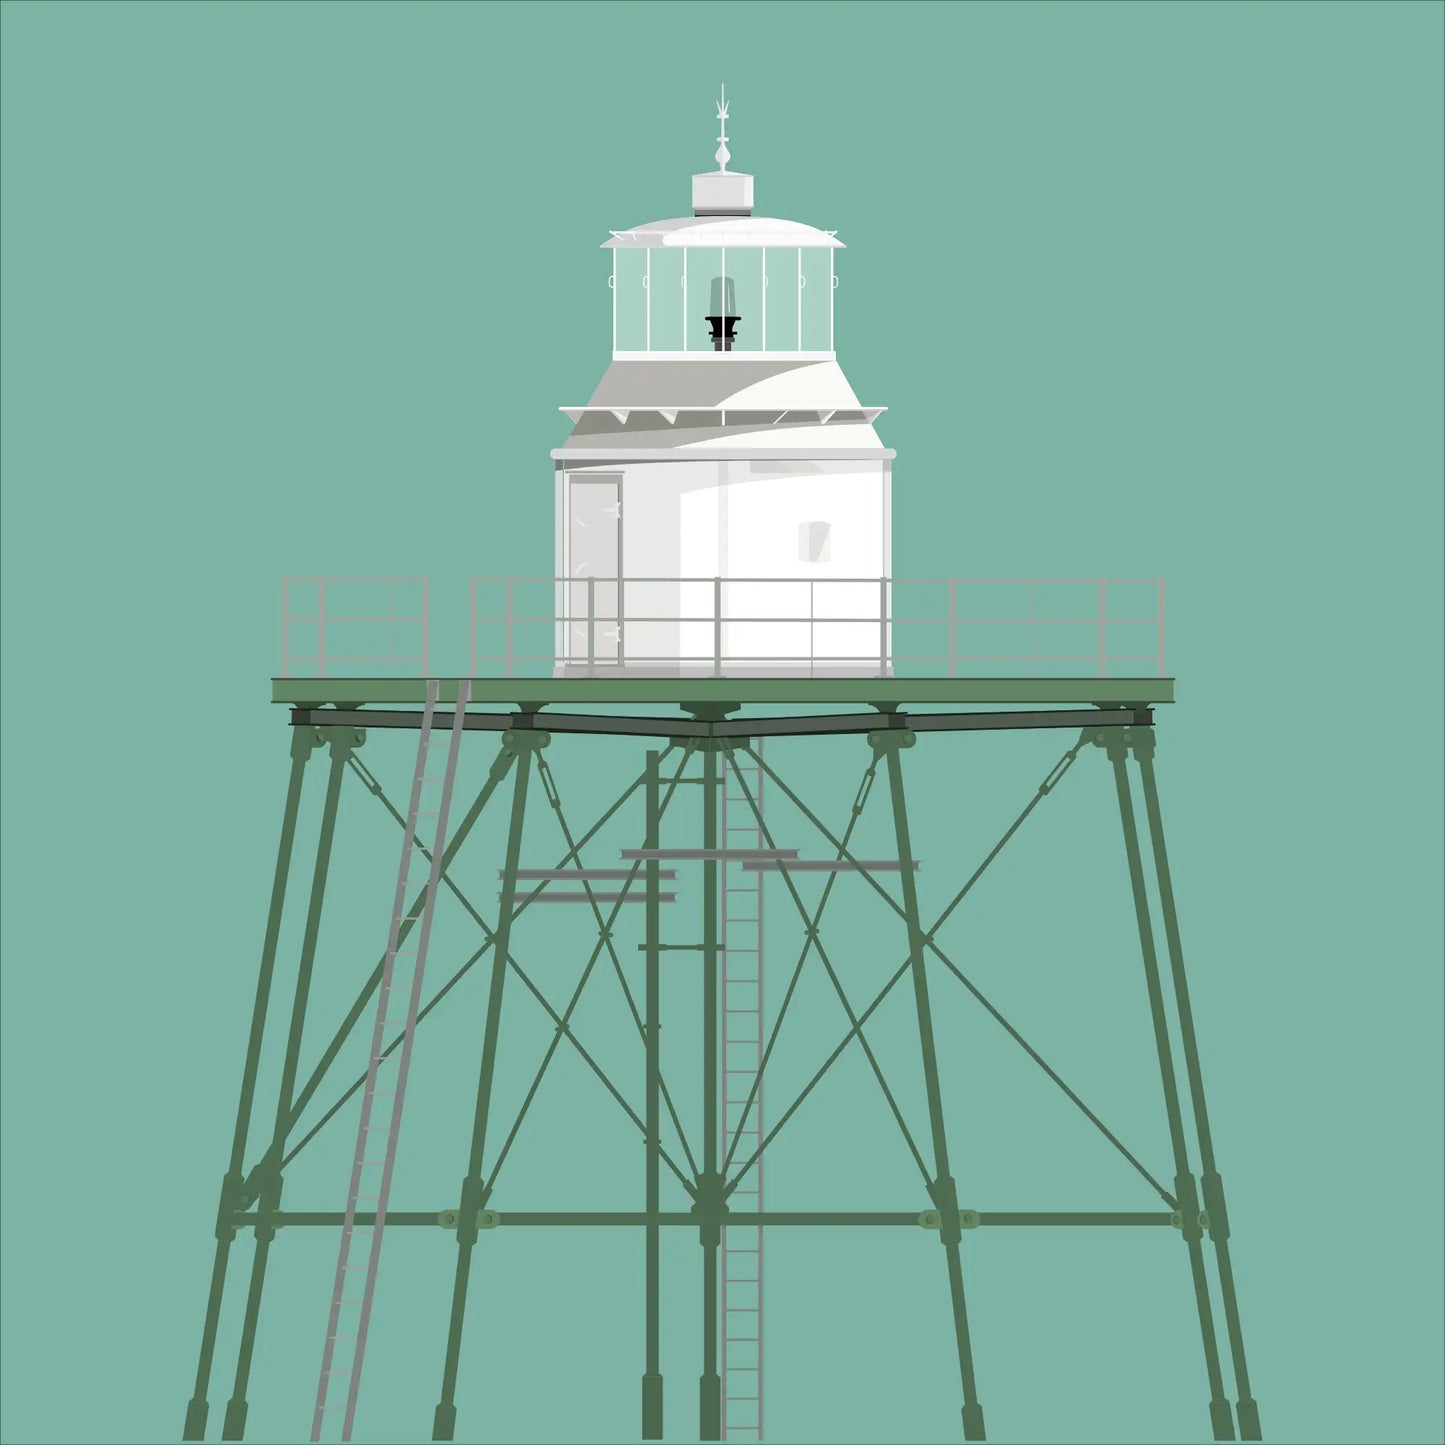 Contemporary graphic illustration of Angus Rock Dundalk lighthouse on a white background inside light blue square.